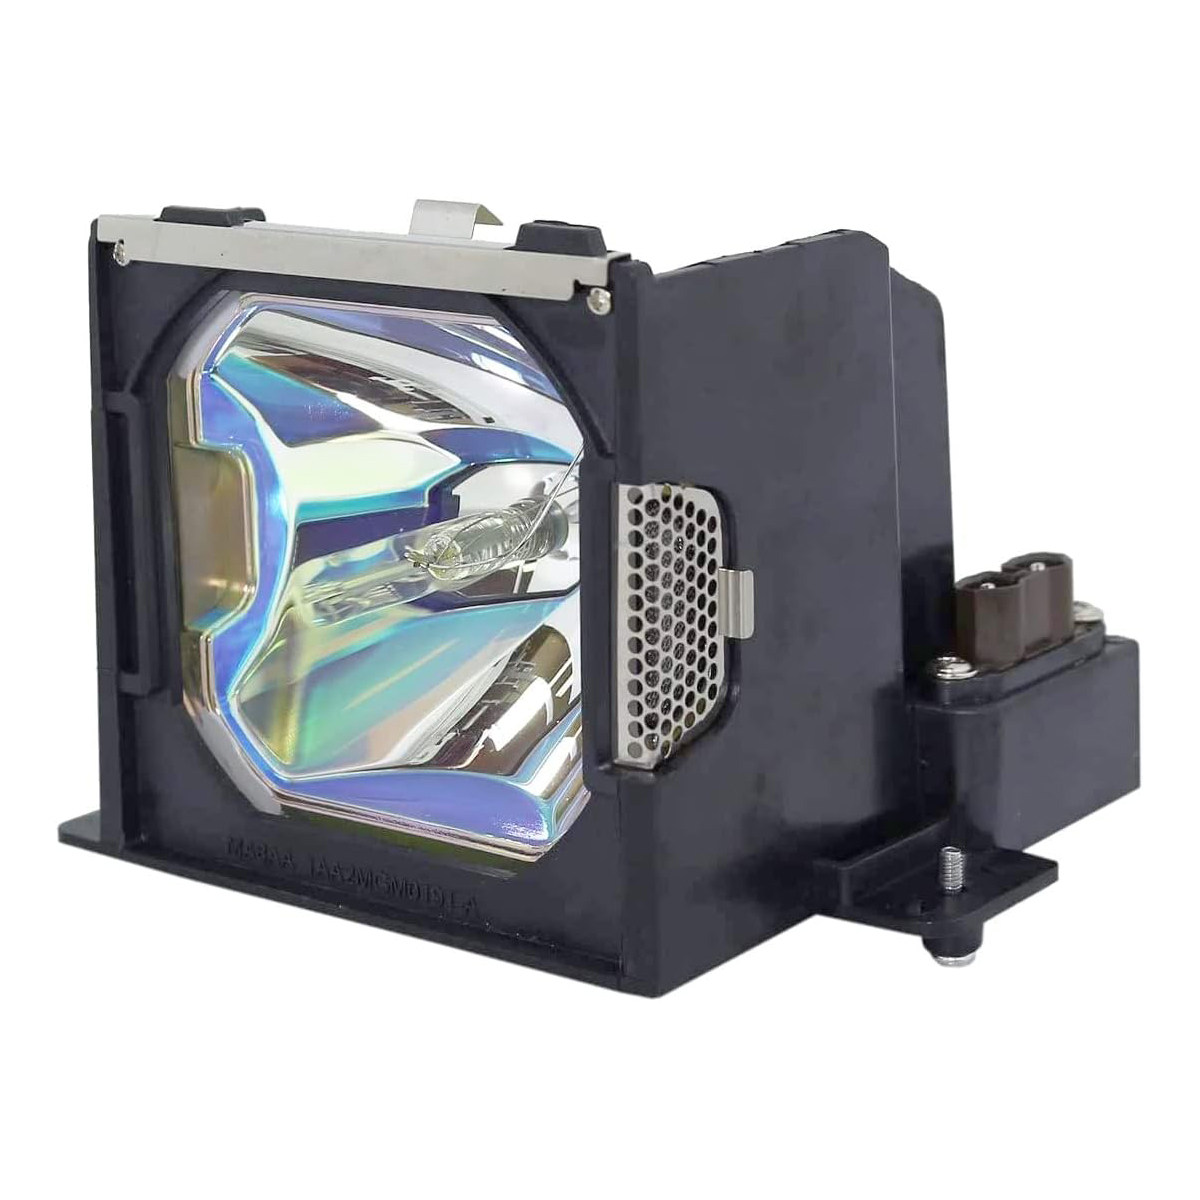 Replacement Projector lamp LV-LP22/9924A001AA For CANON LV-7565